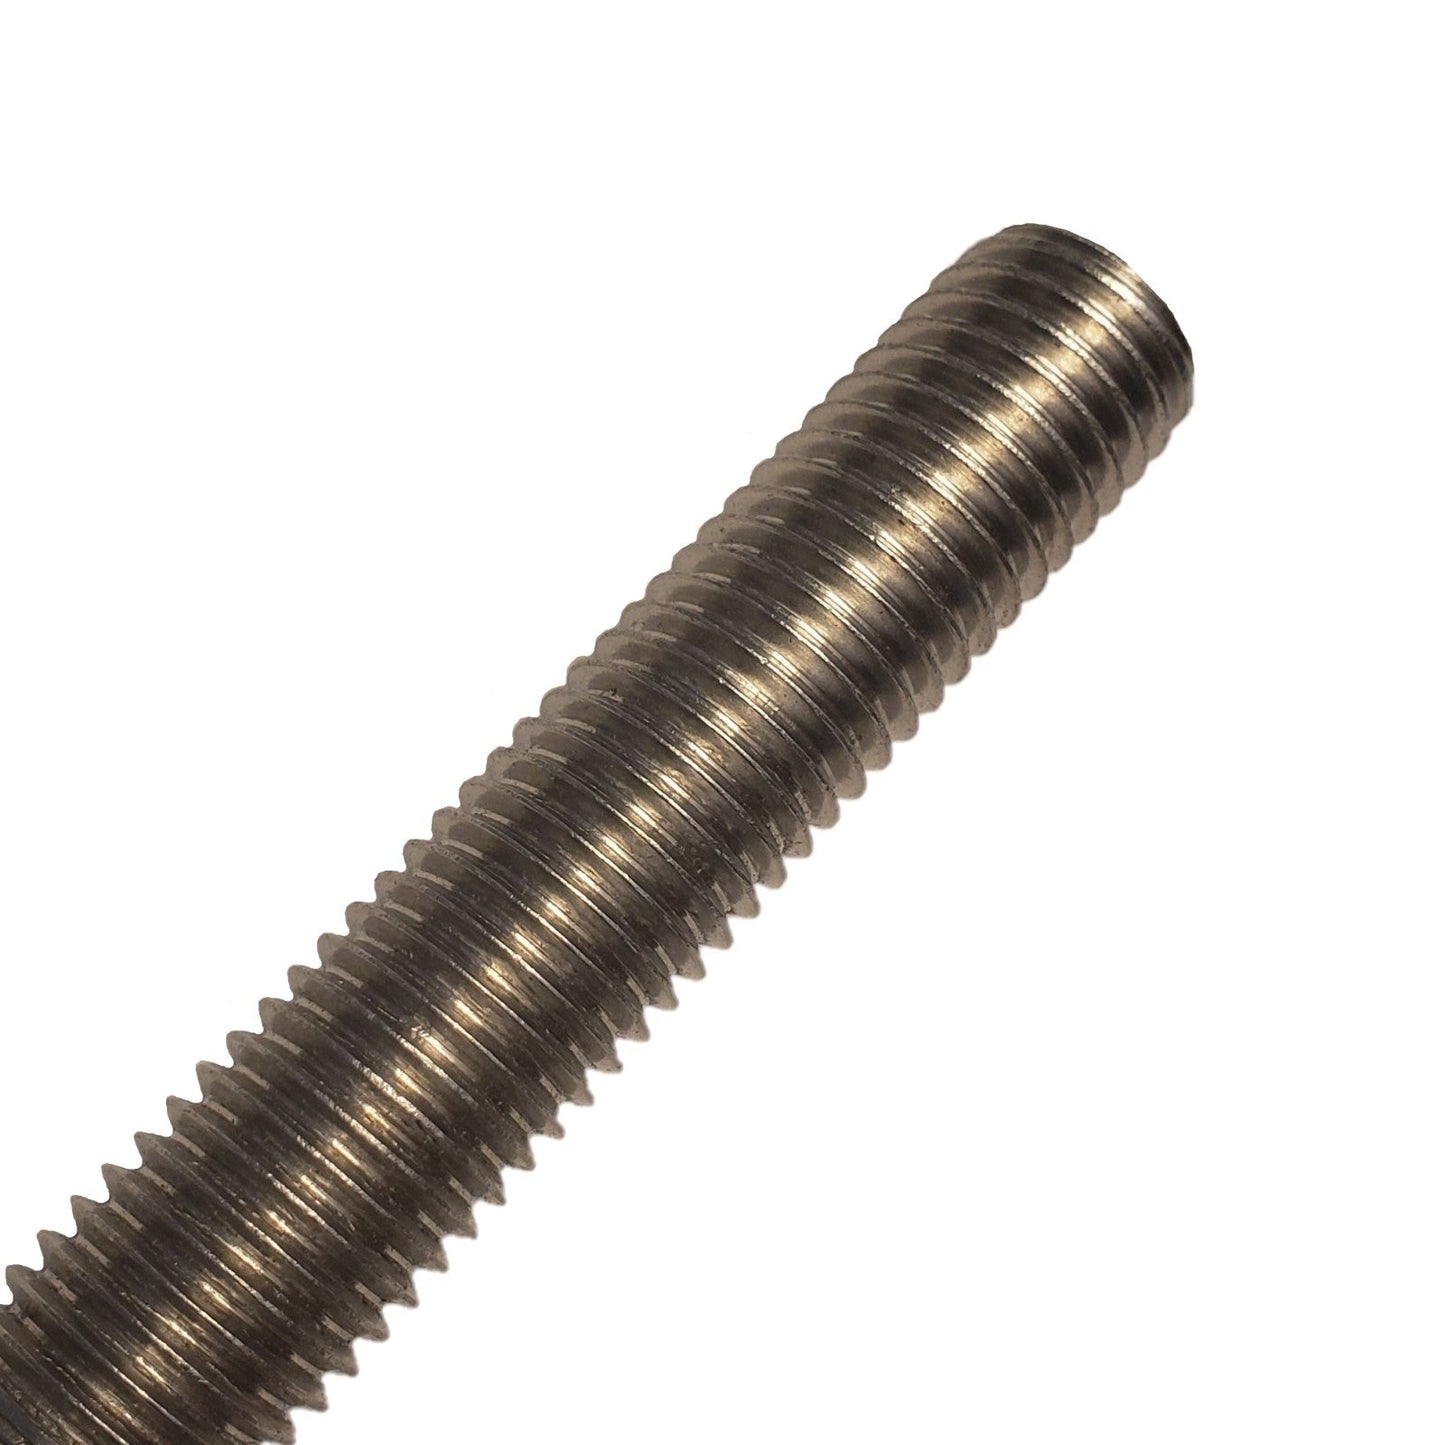 7/8"-9 x 1' 316 Stainless Threaded Rod - Made In USA